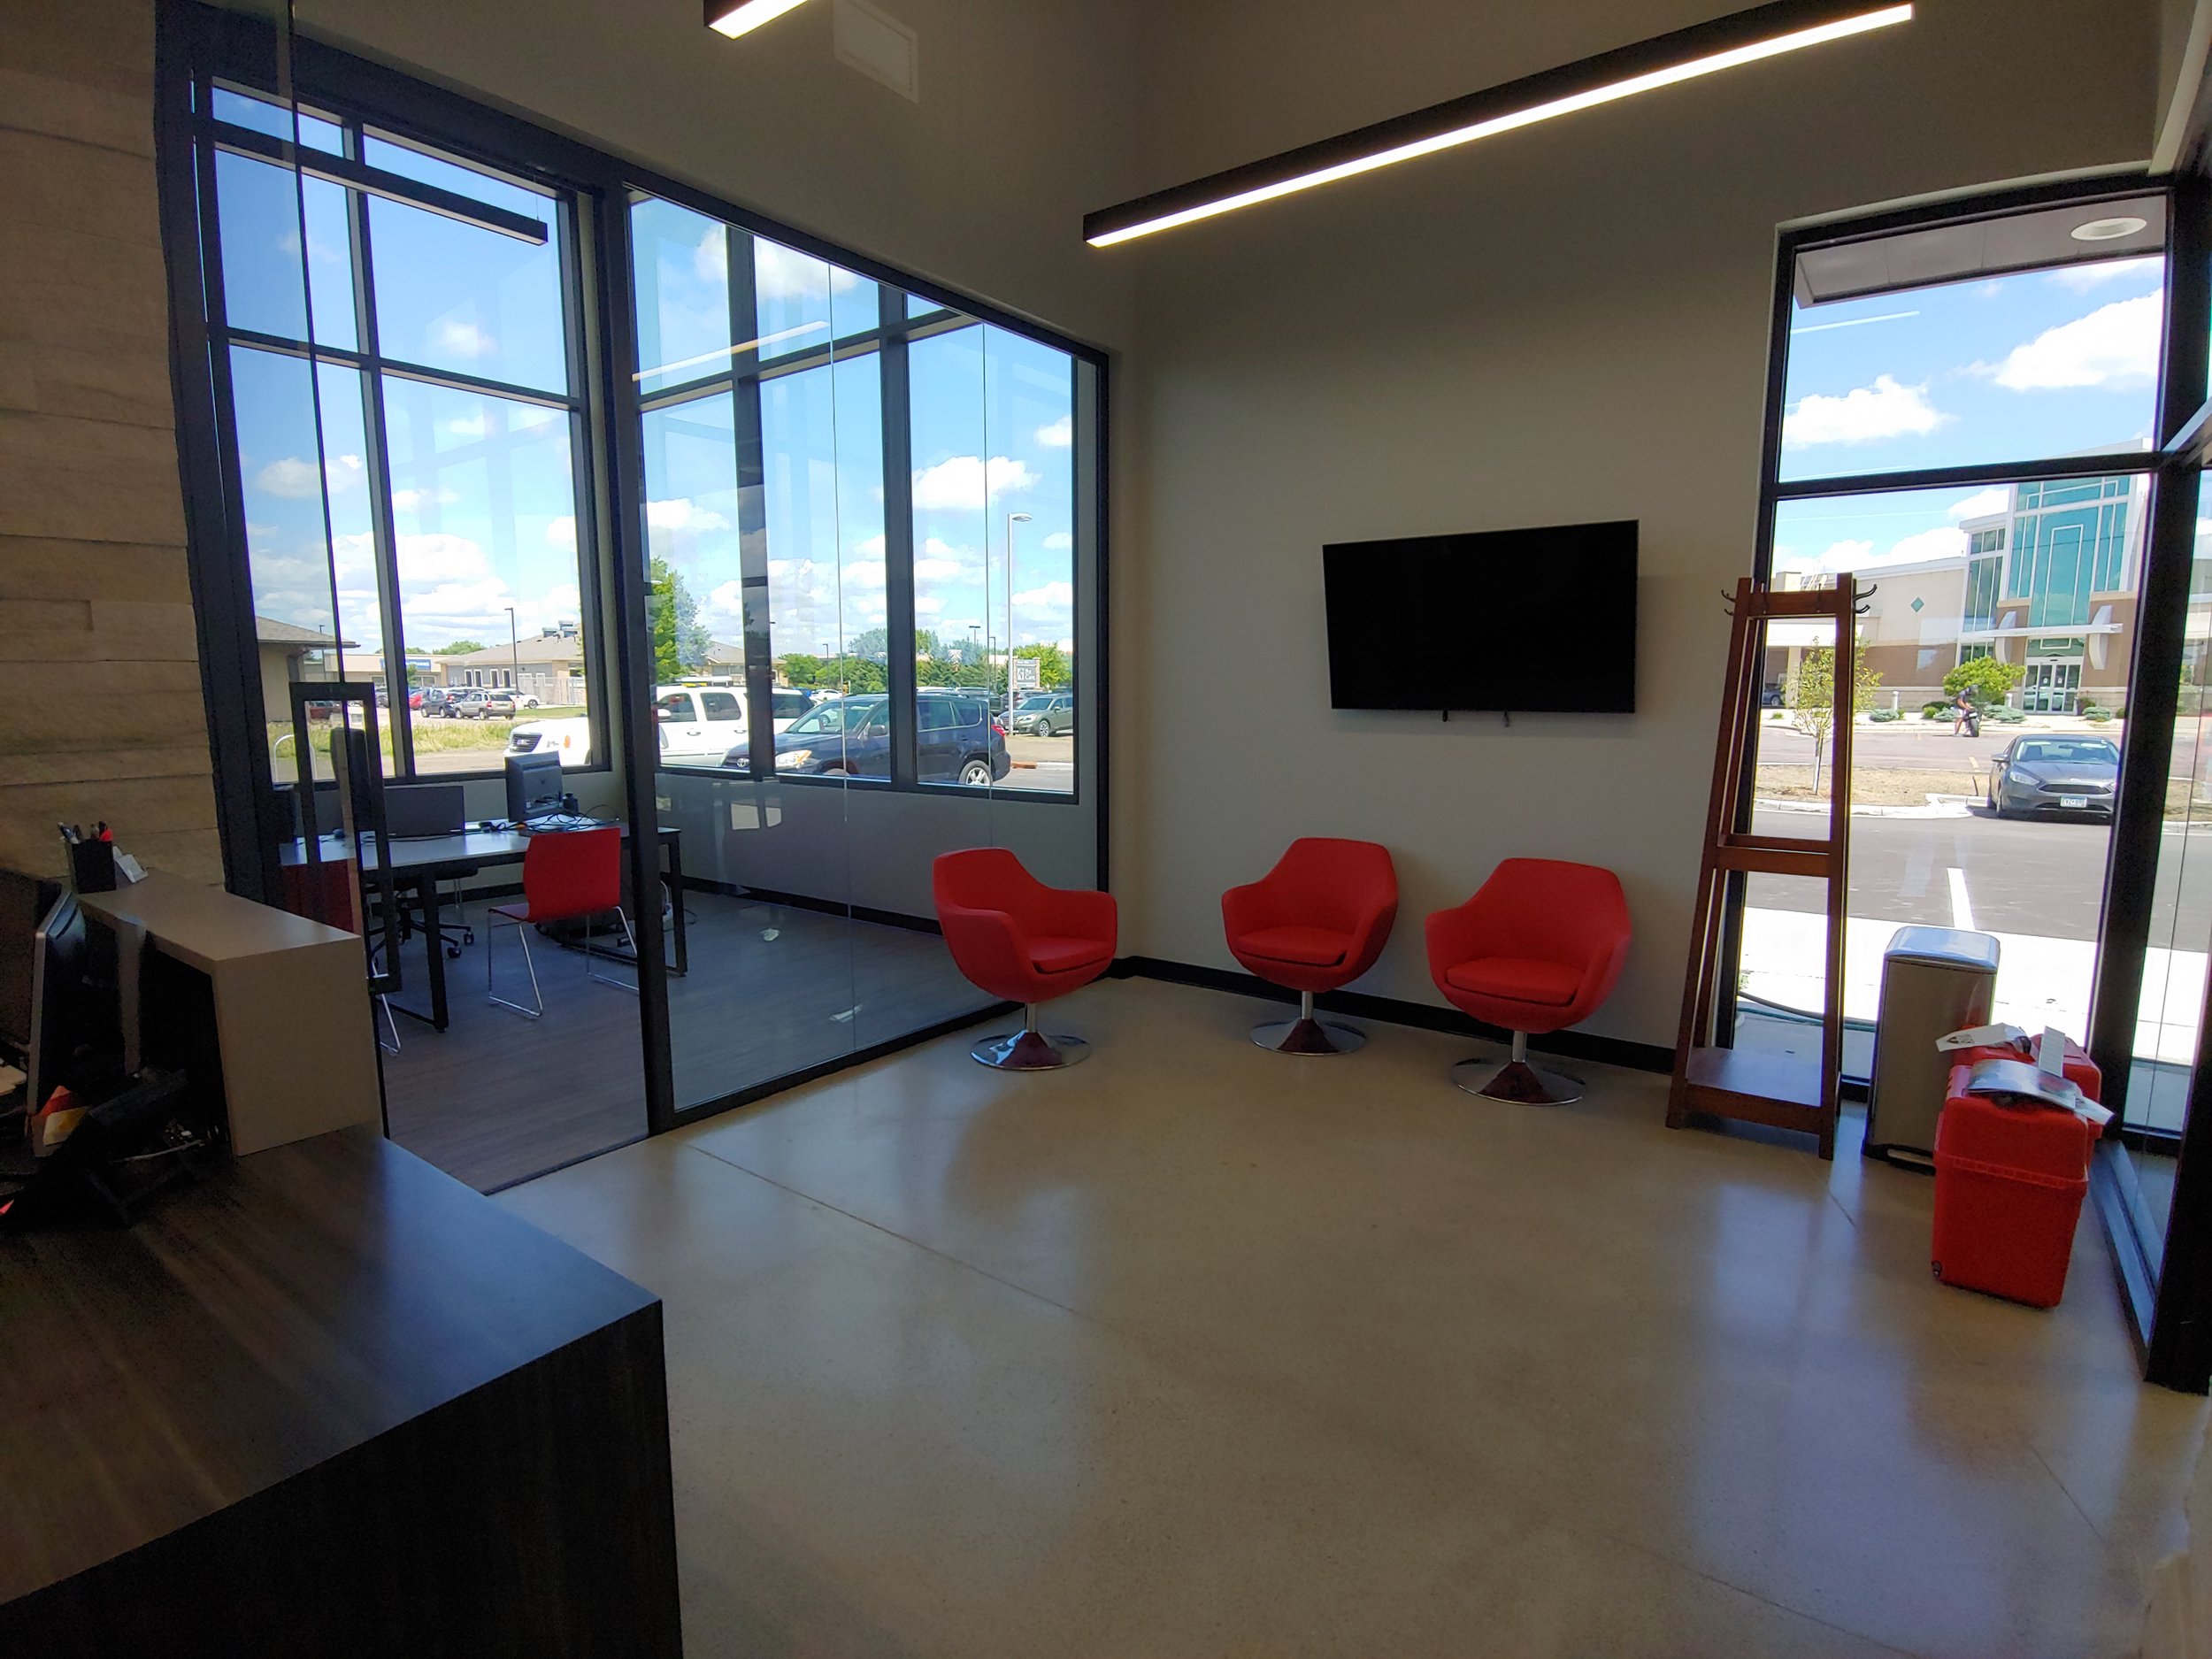 WEB Office Interior Entry Waiting Area